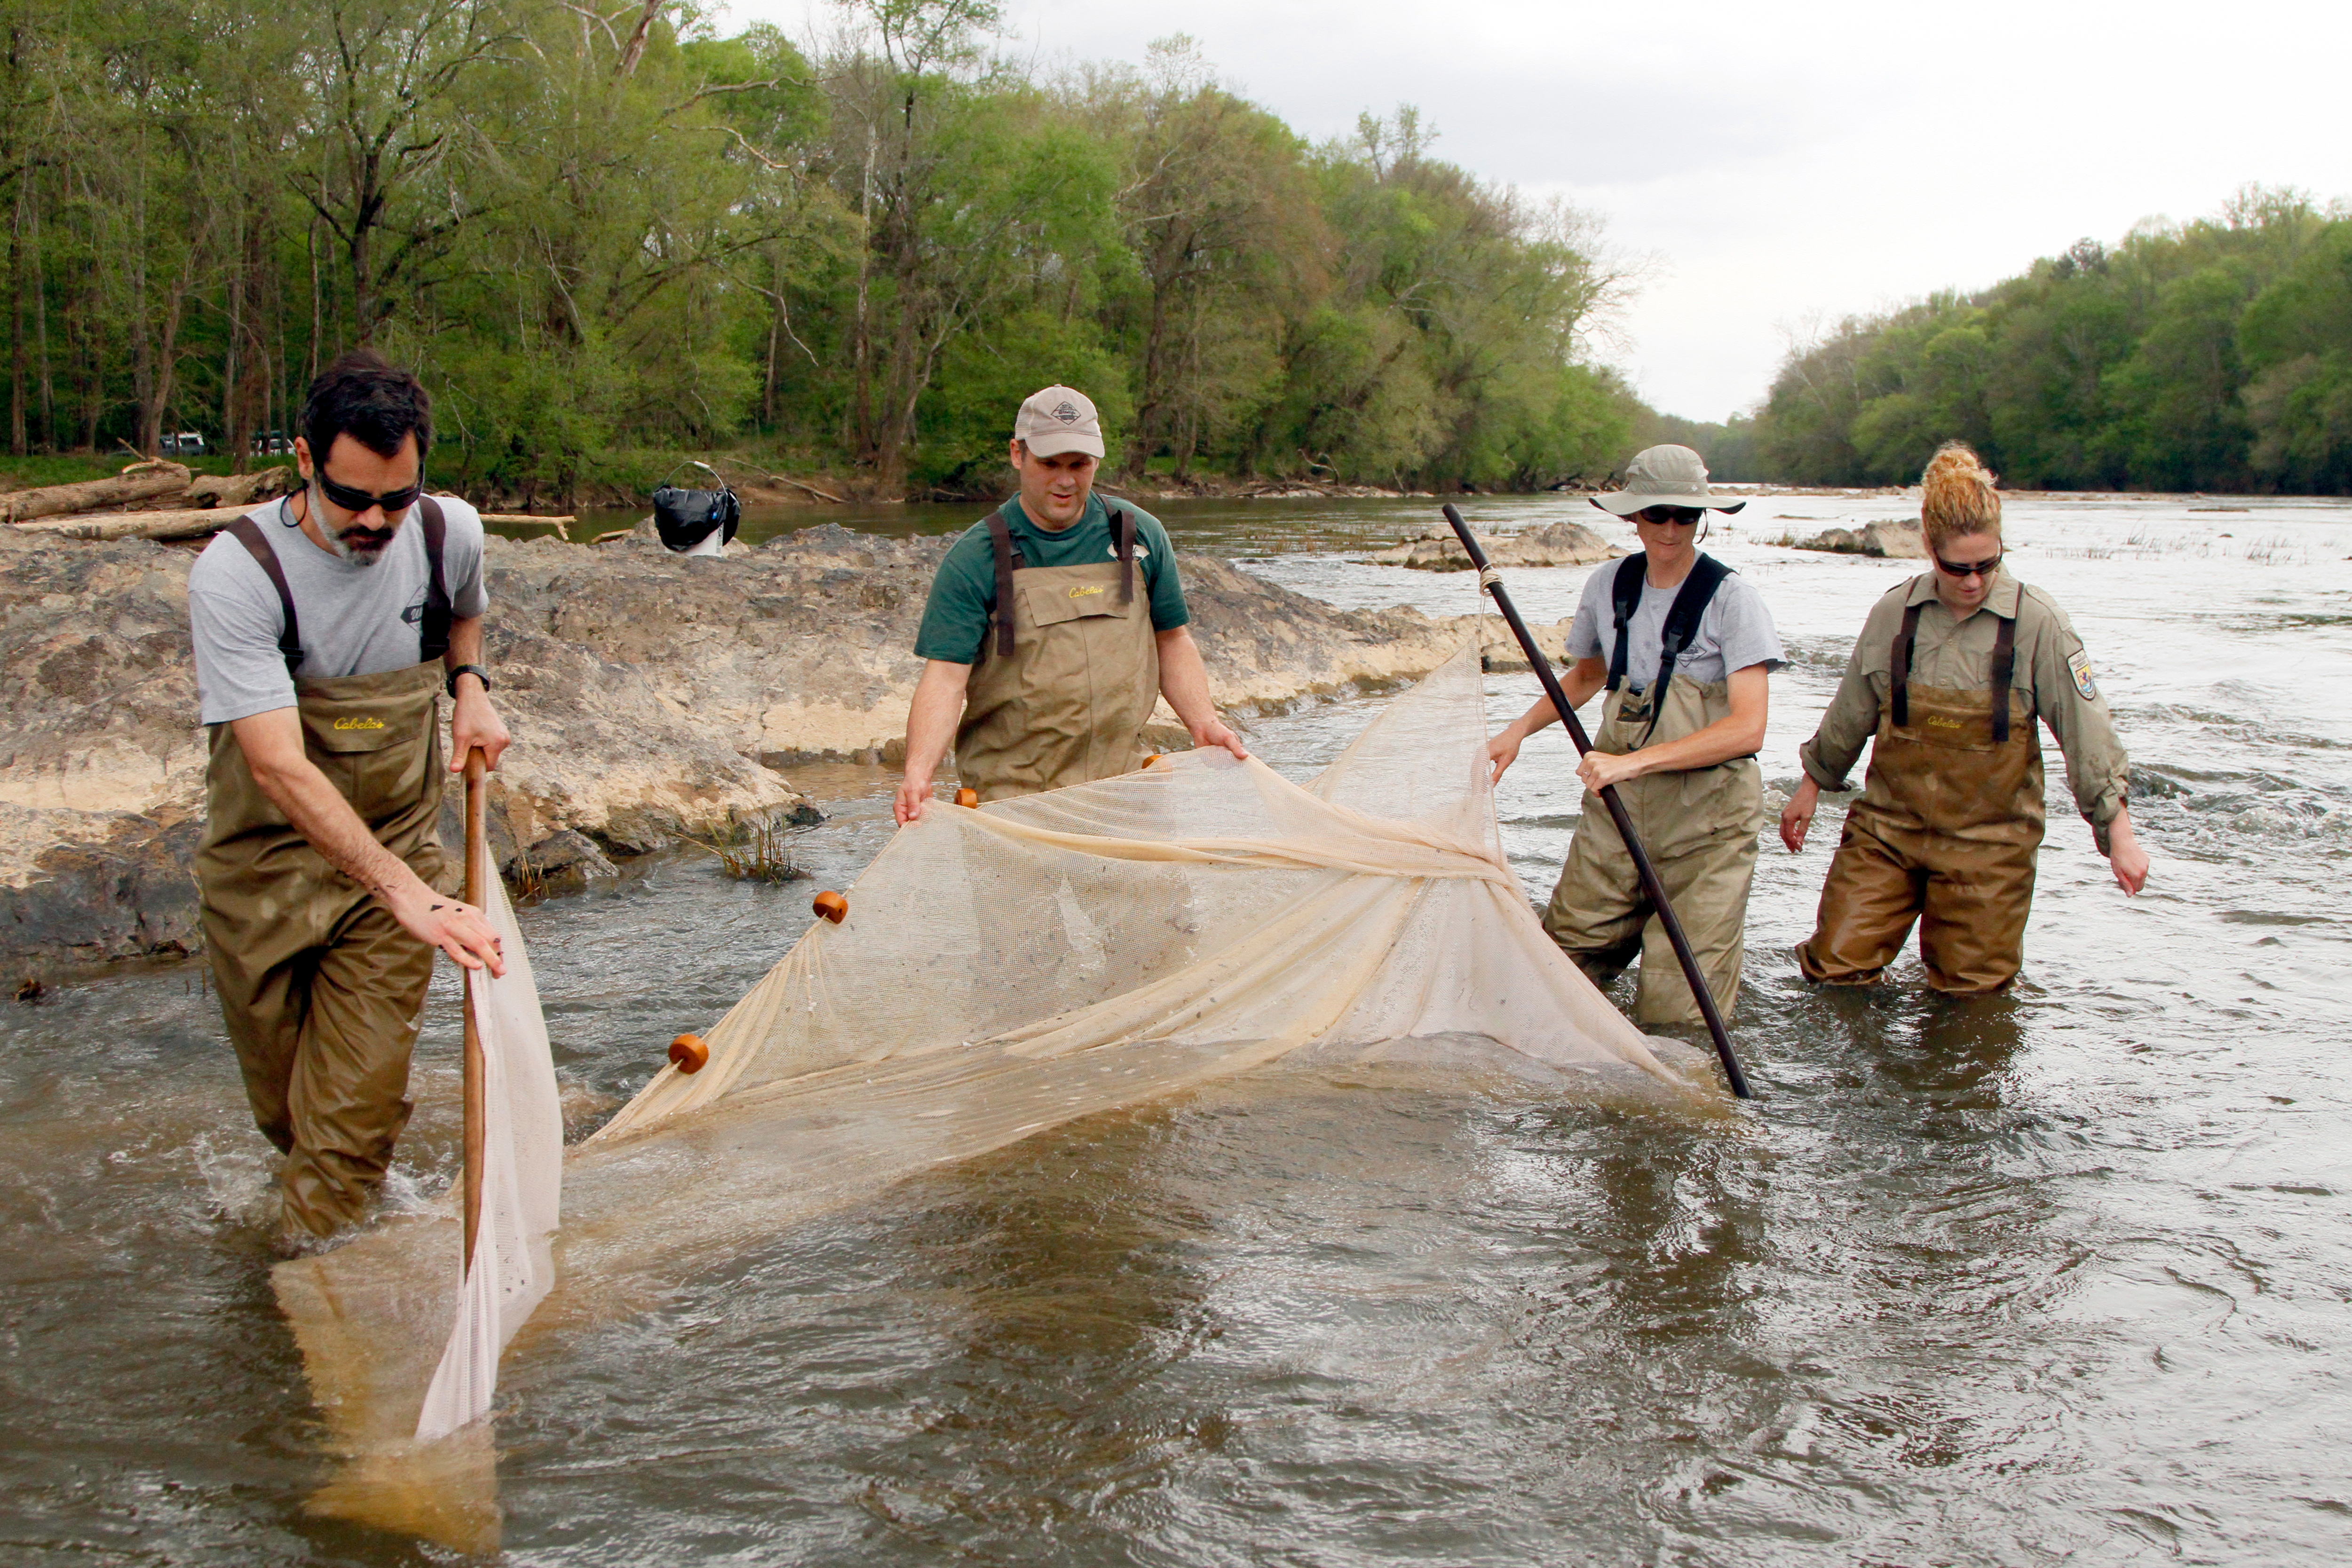 Two men and two women are standing in a shallow river with vegetation and rocks behind them. Three of them are holding a net that is partially submerged. and they are all moving towards the camera.